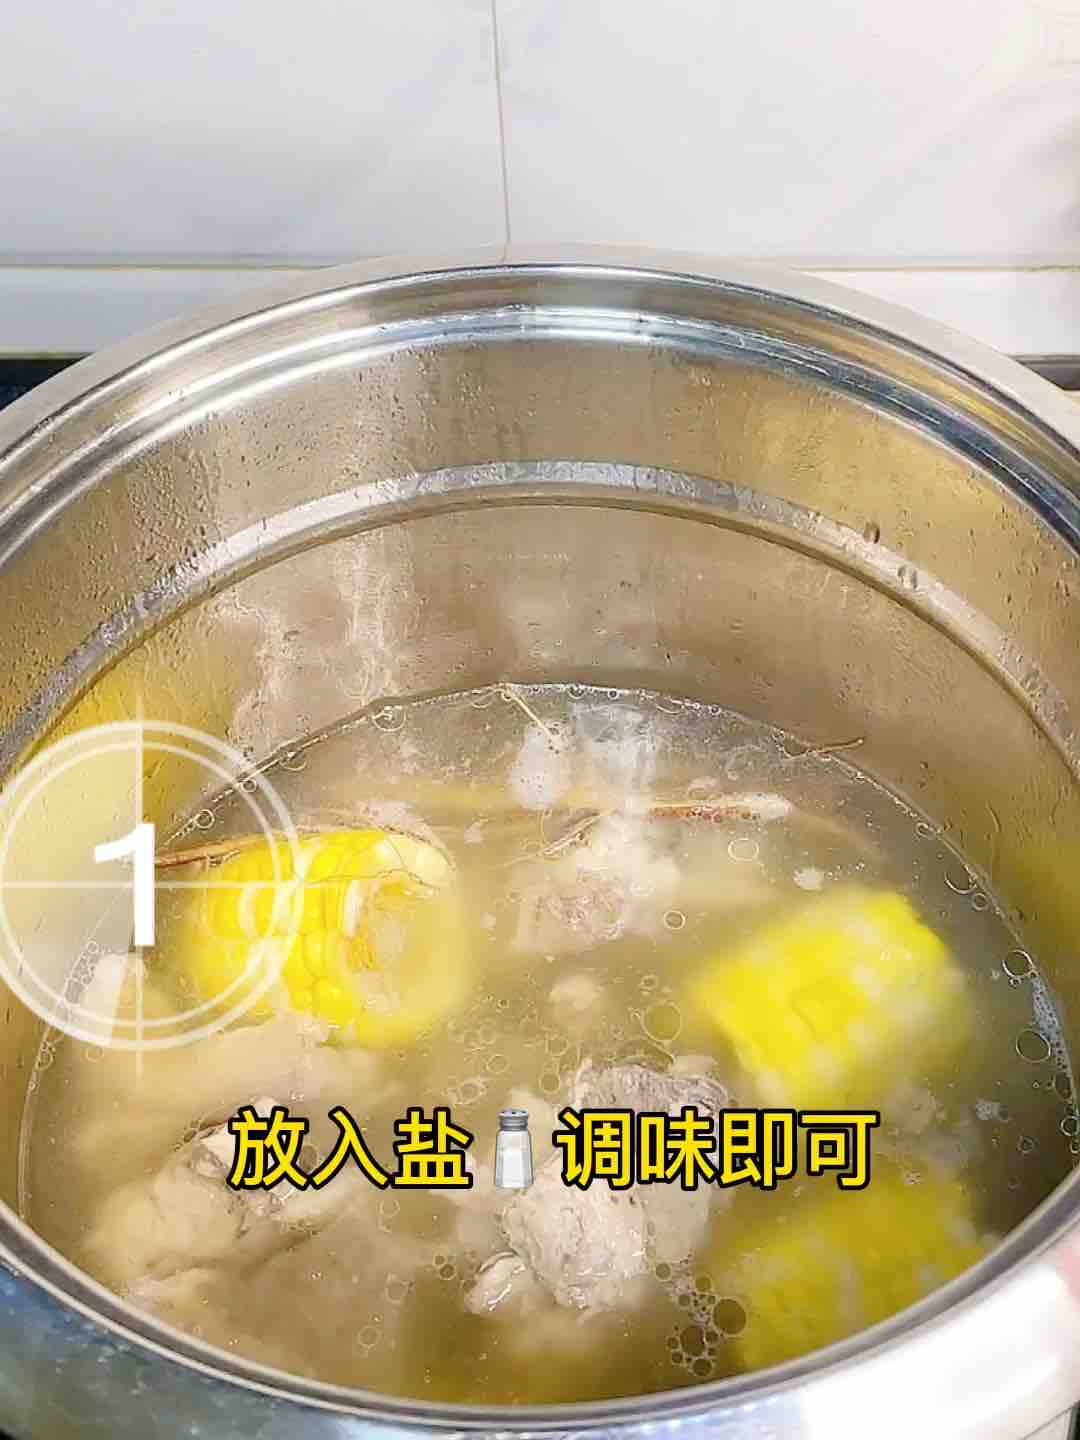 Fragrant Shili Laoguang Liang Soup, Pork Bones are Cooked Like This, Super Fragrant and Super Good recipe